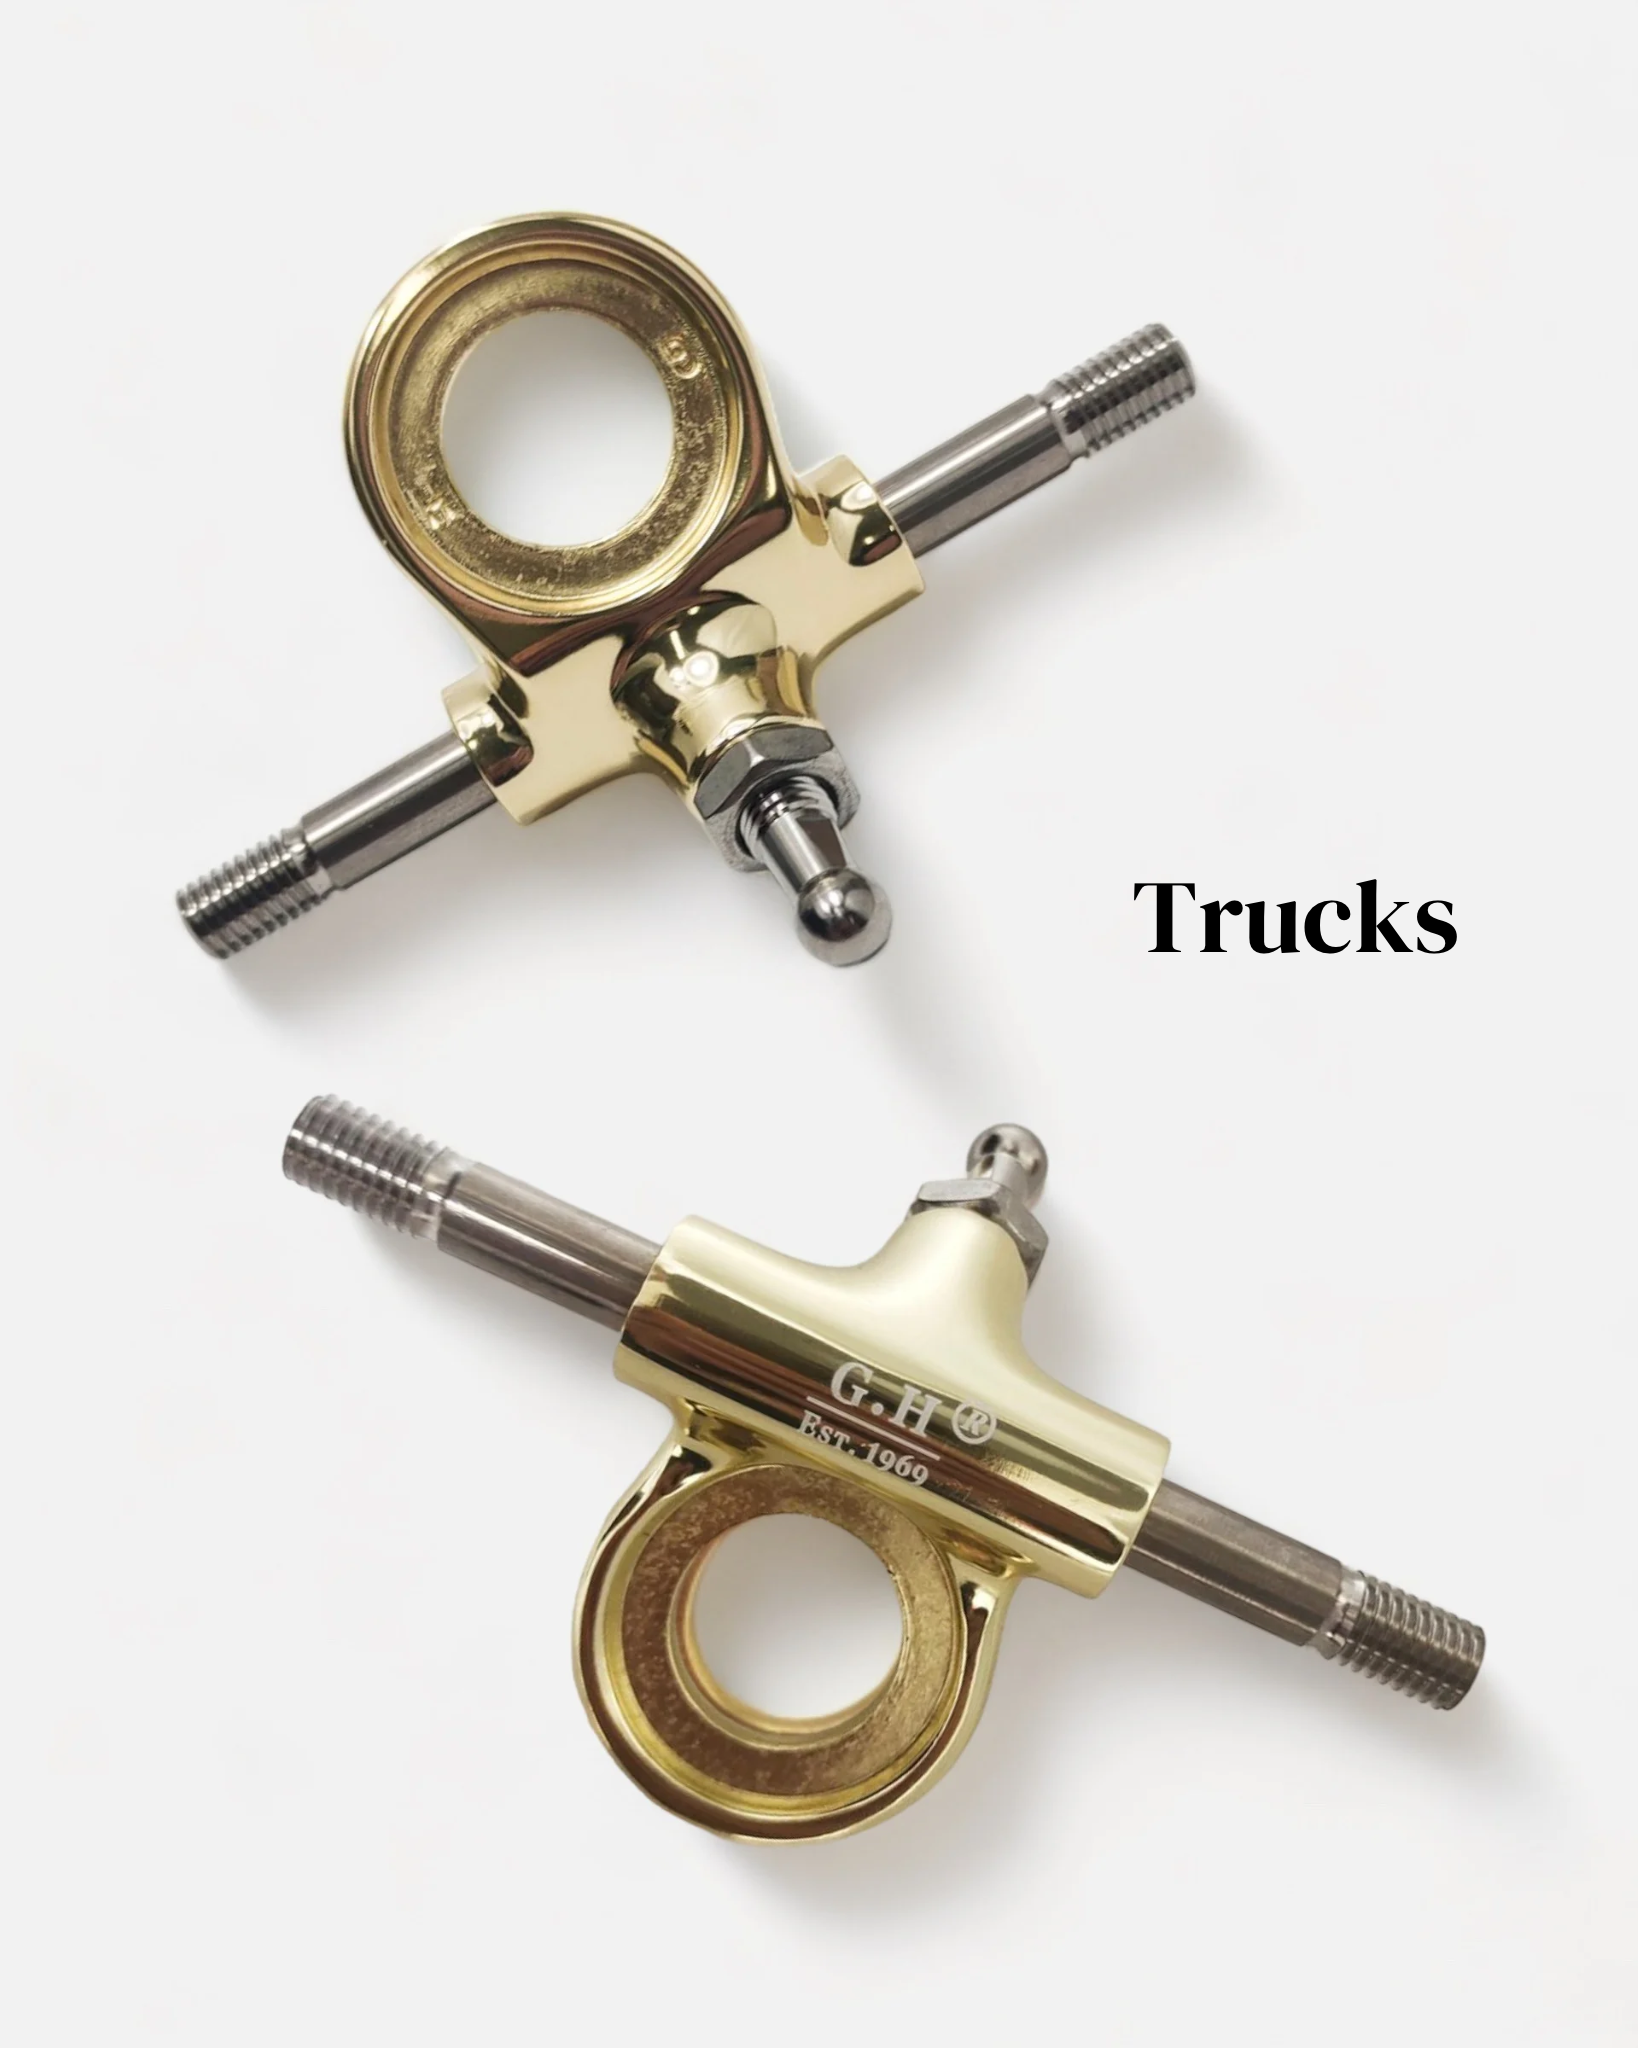 Spare parts for GH metal trucks